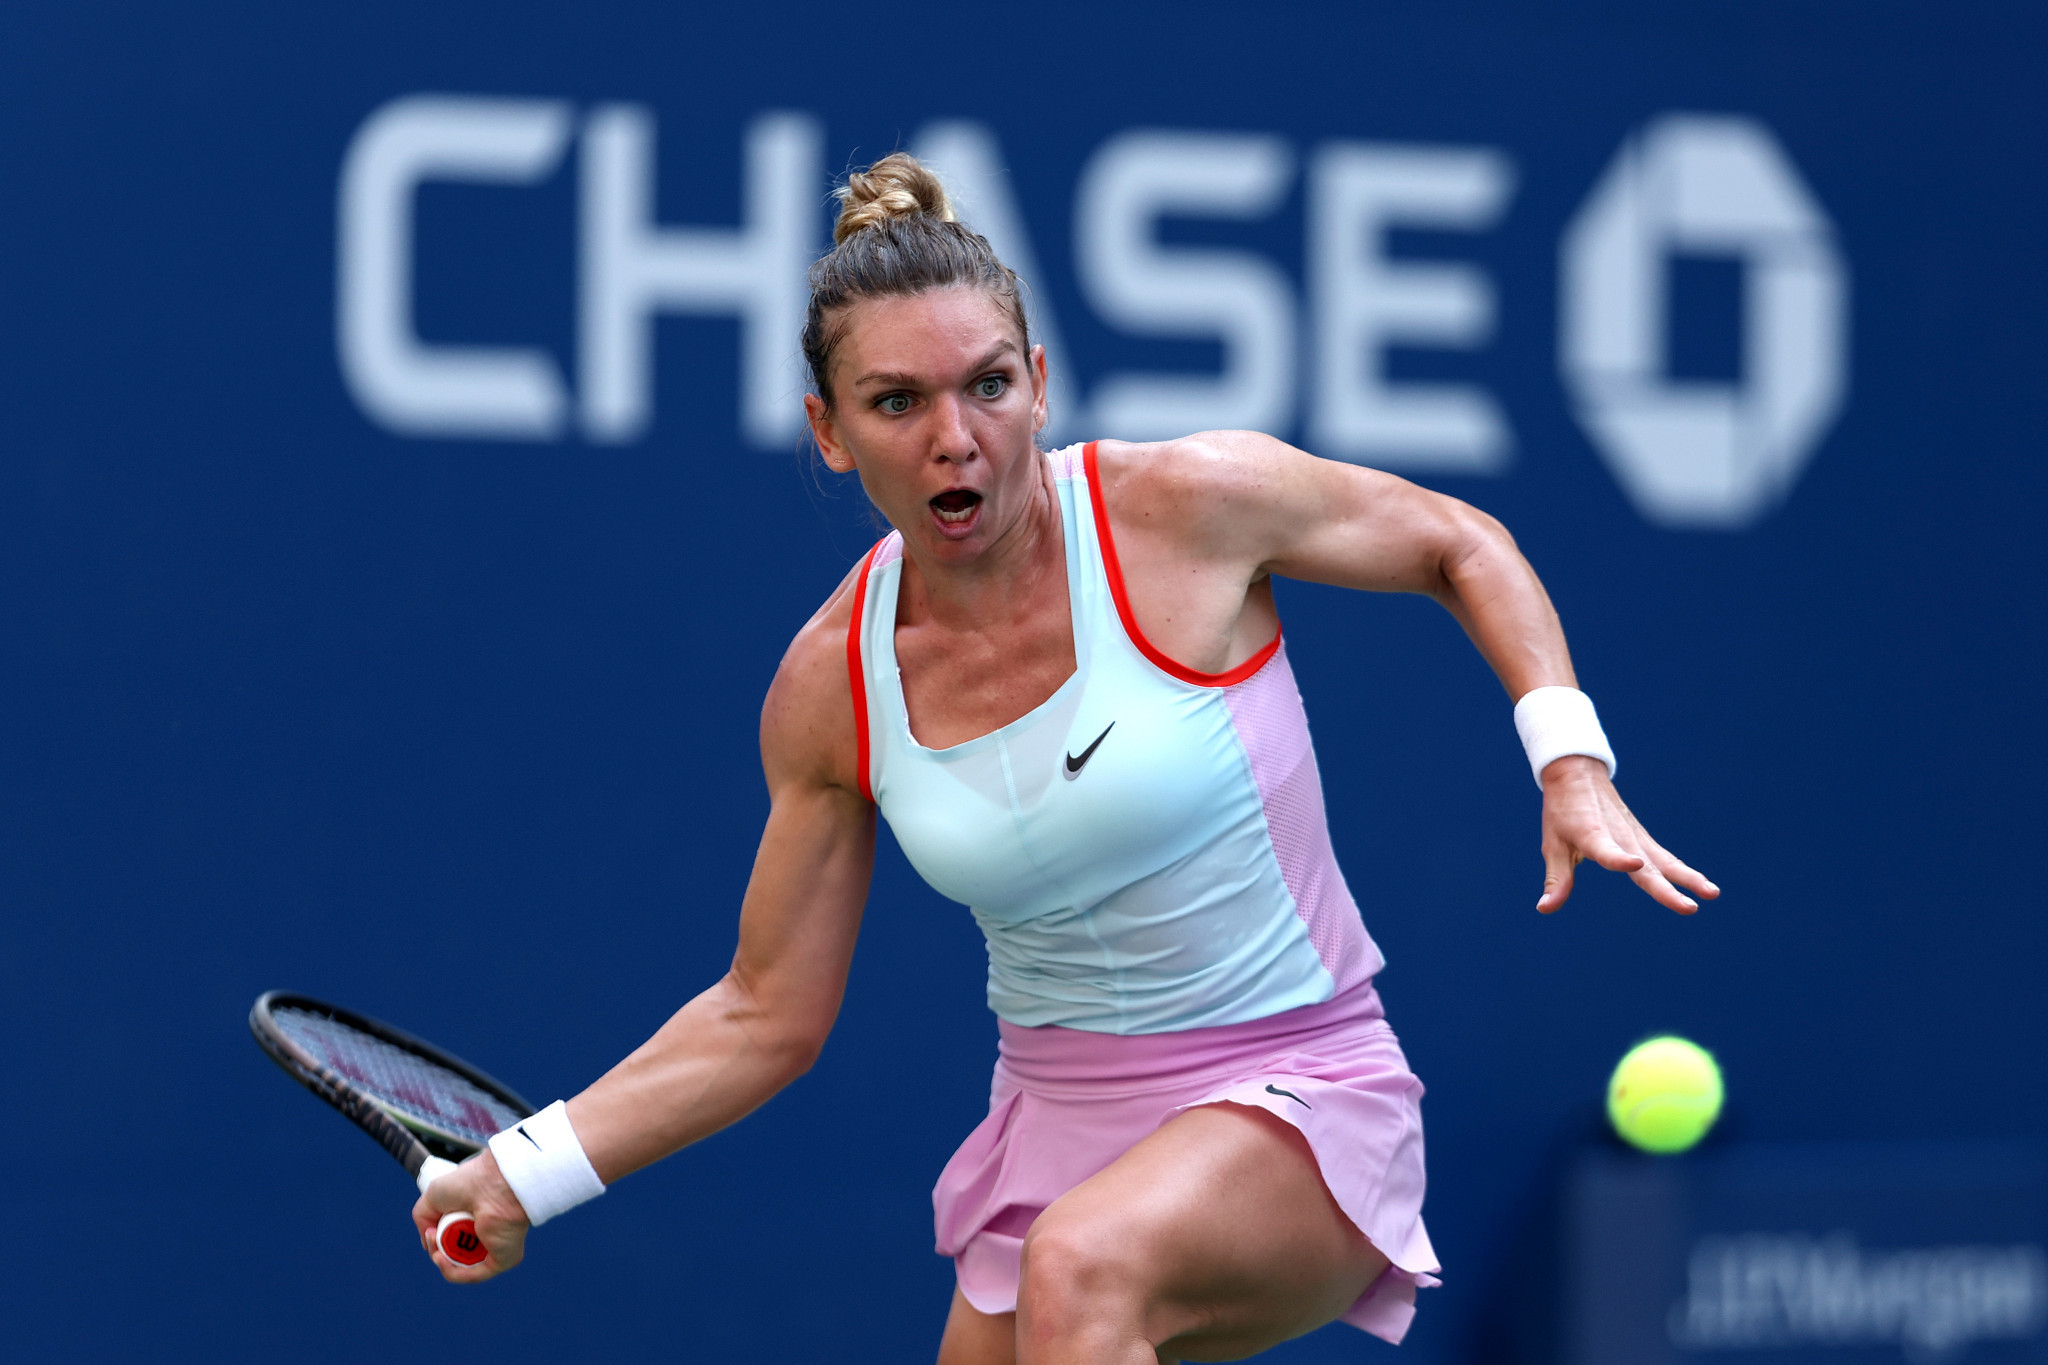 Simona Halep of Romania suffered a shock first round exit at the US Open ©Getty Images